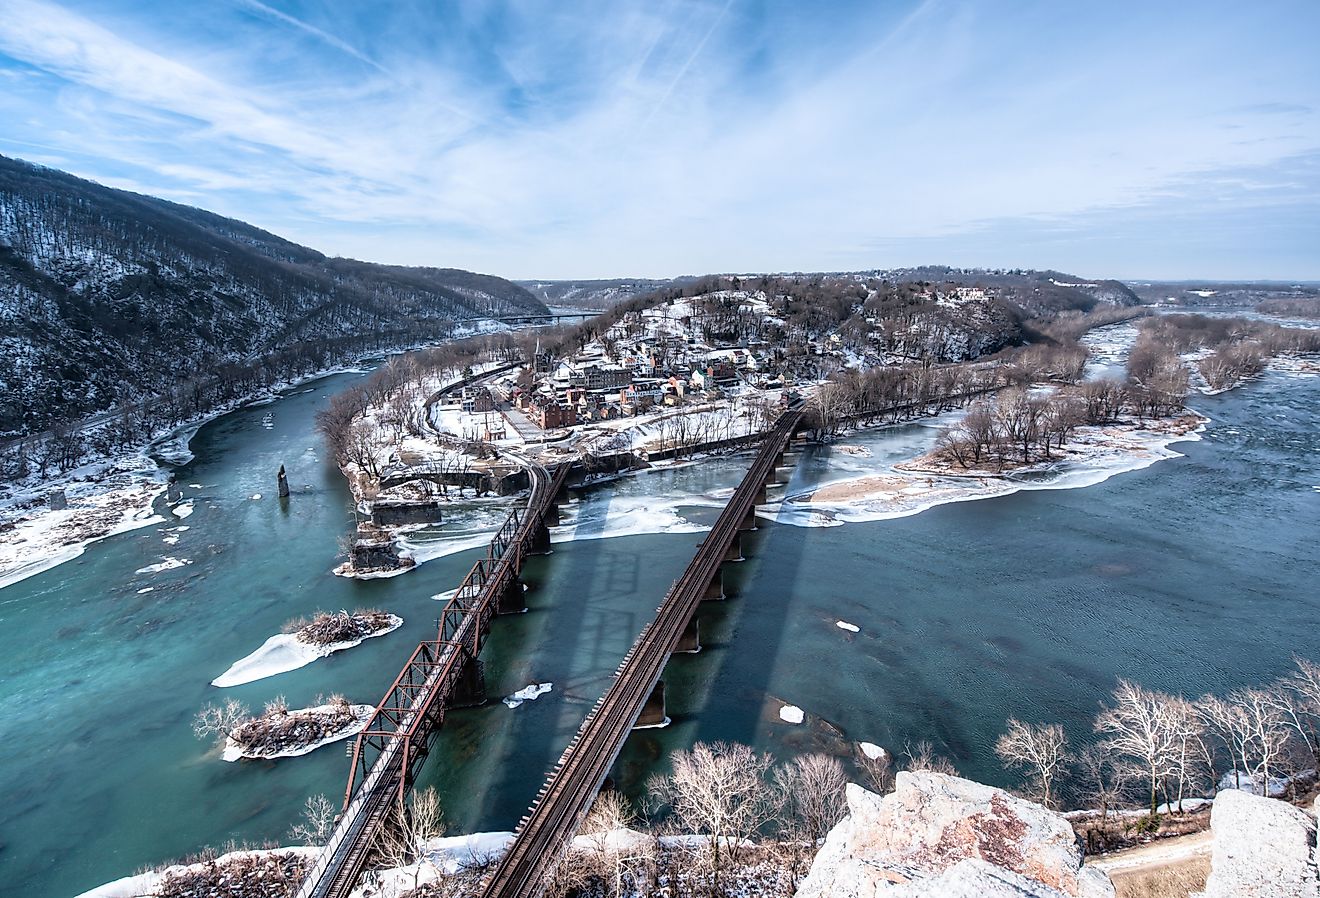 Harpers Ferry, WV with snow on the ground and in the Shenandoah and Potomac river, shot from the Maryland Heights Overlook